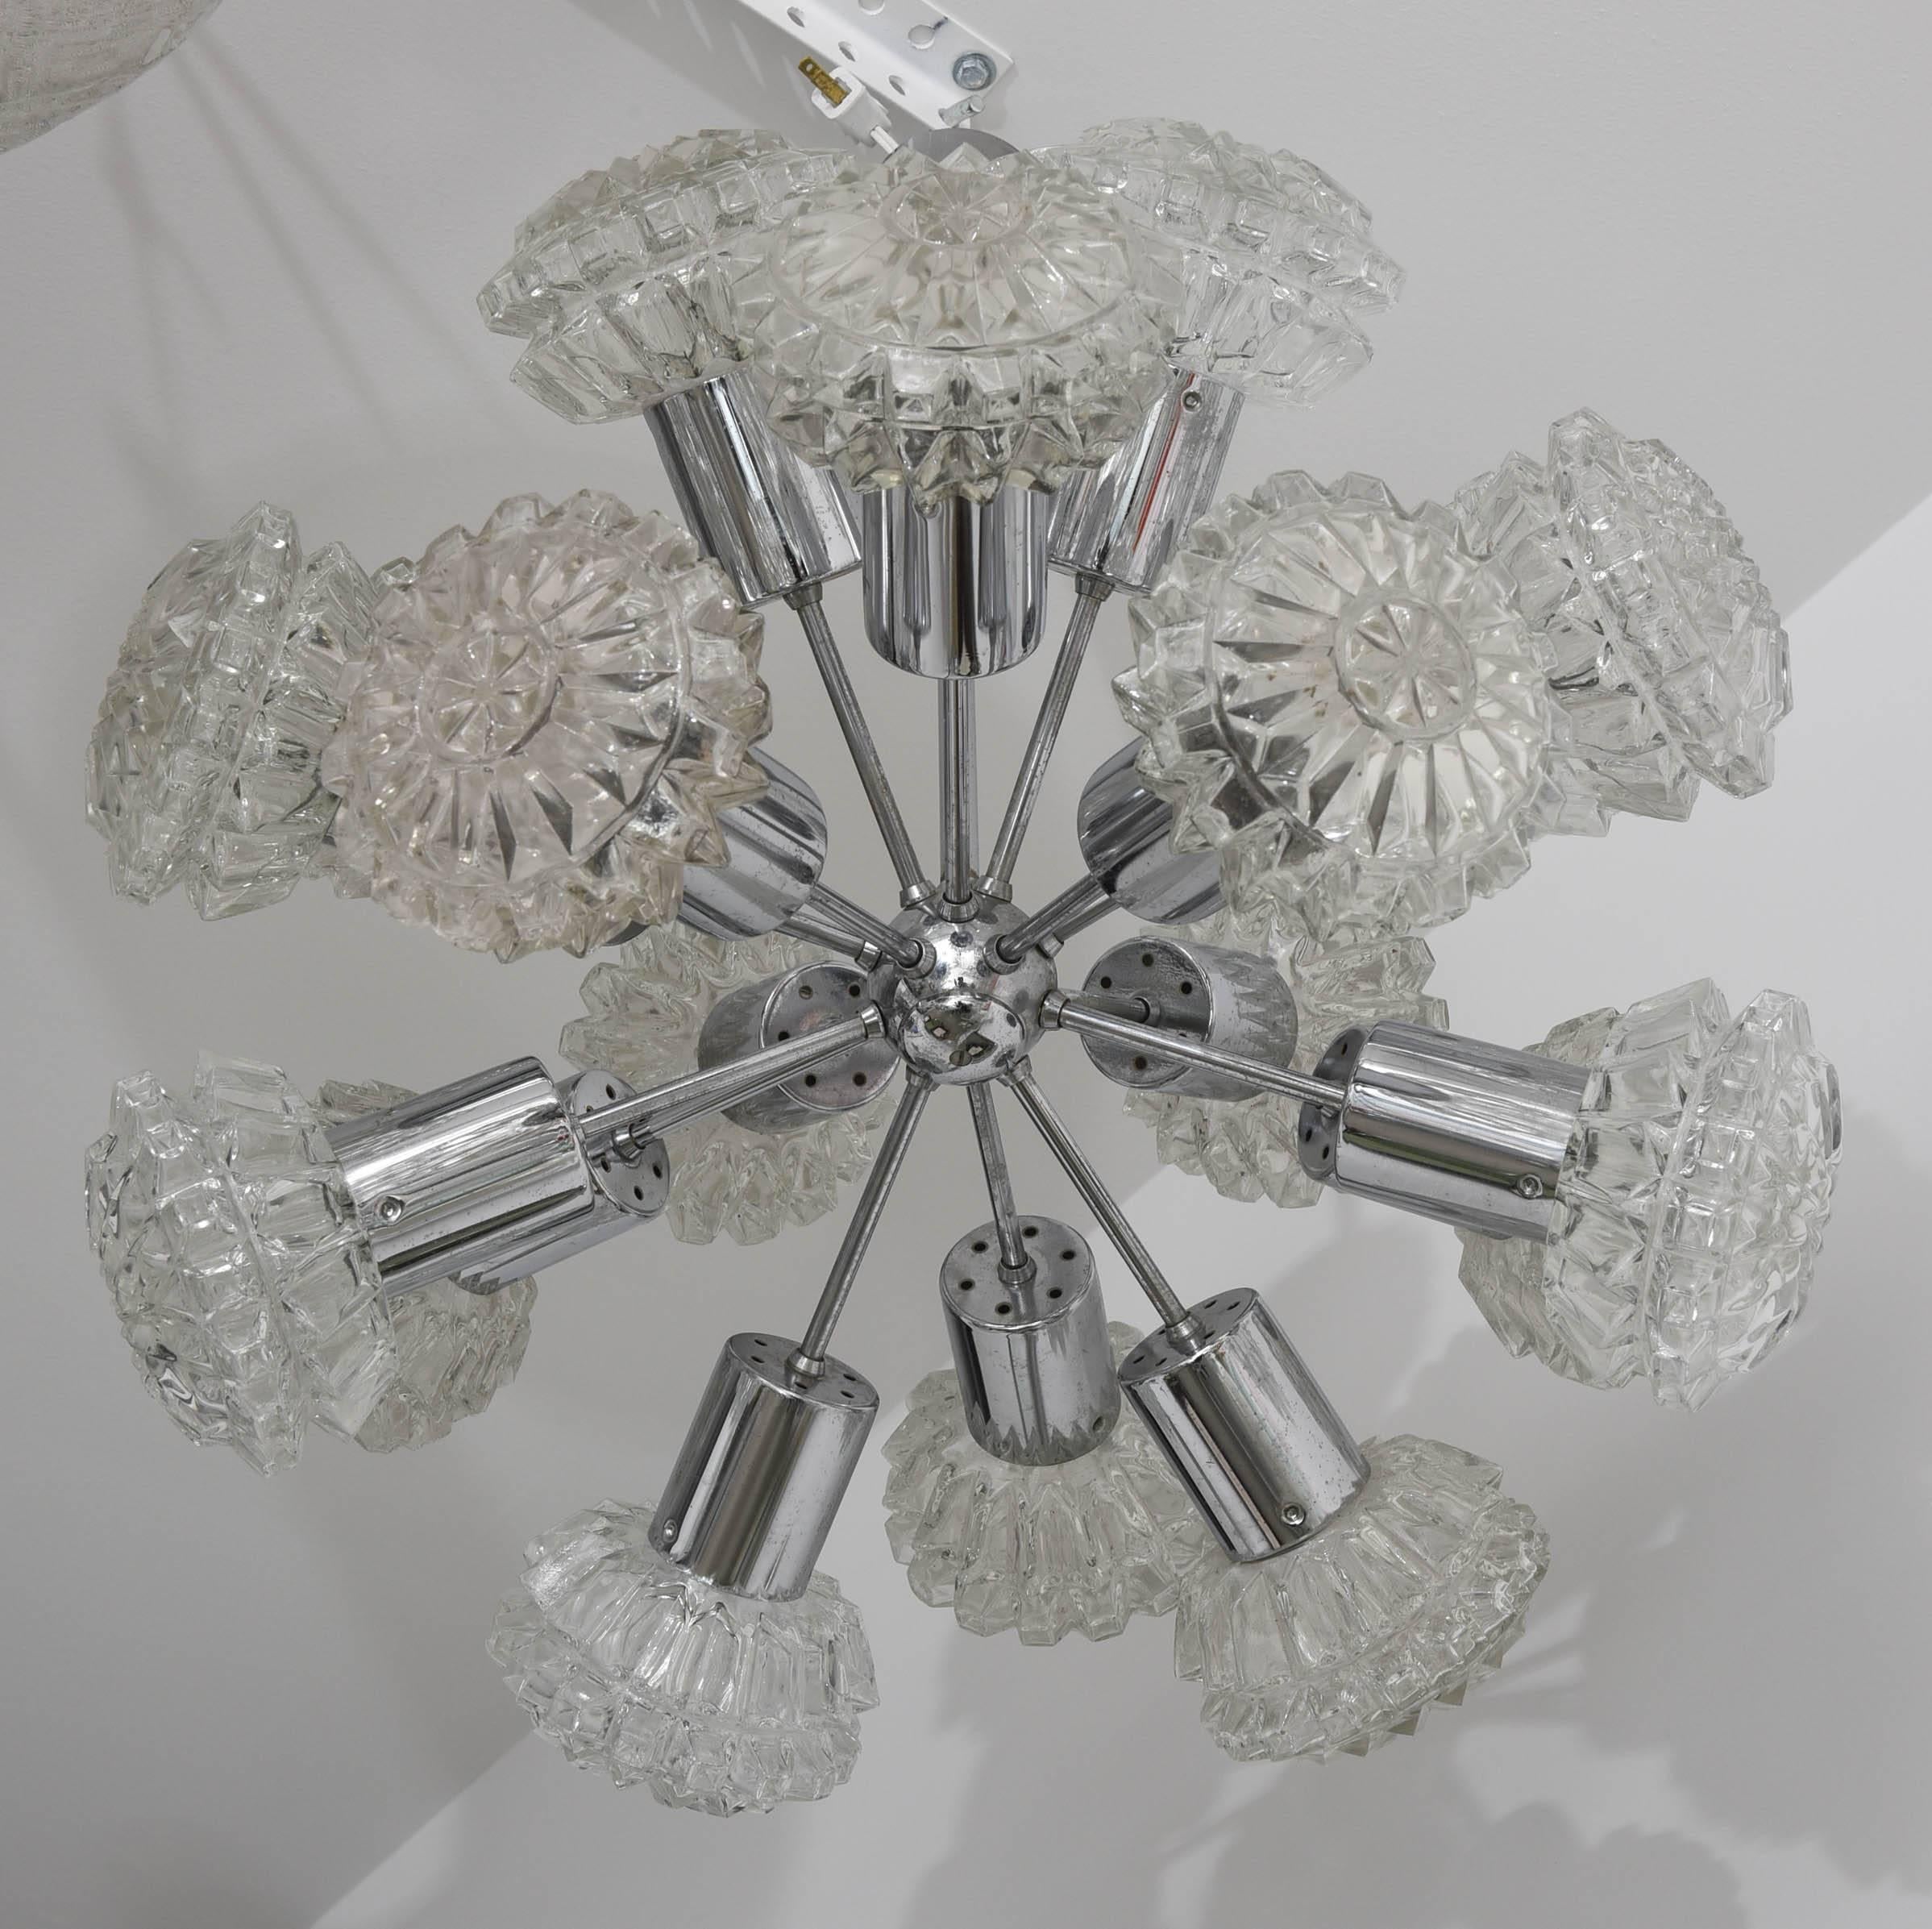 This amazing Mid-Century Modern polished chrome and glass chandelier was created by the iconic designer Richard Essig in the 1960s. The piece is a play on the Classic "Sputnik" with clear glass stylized flowers. 

Note: This piece